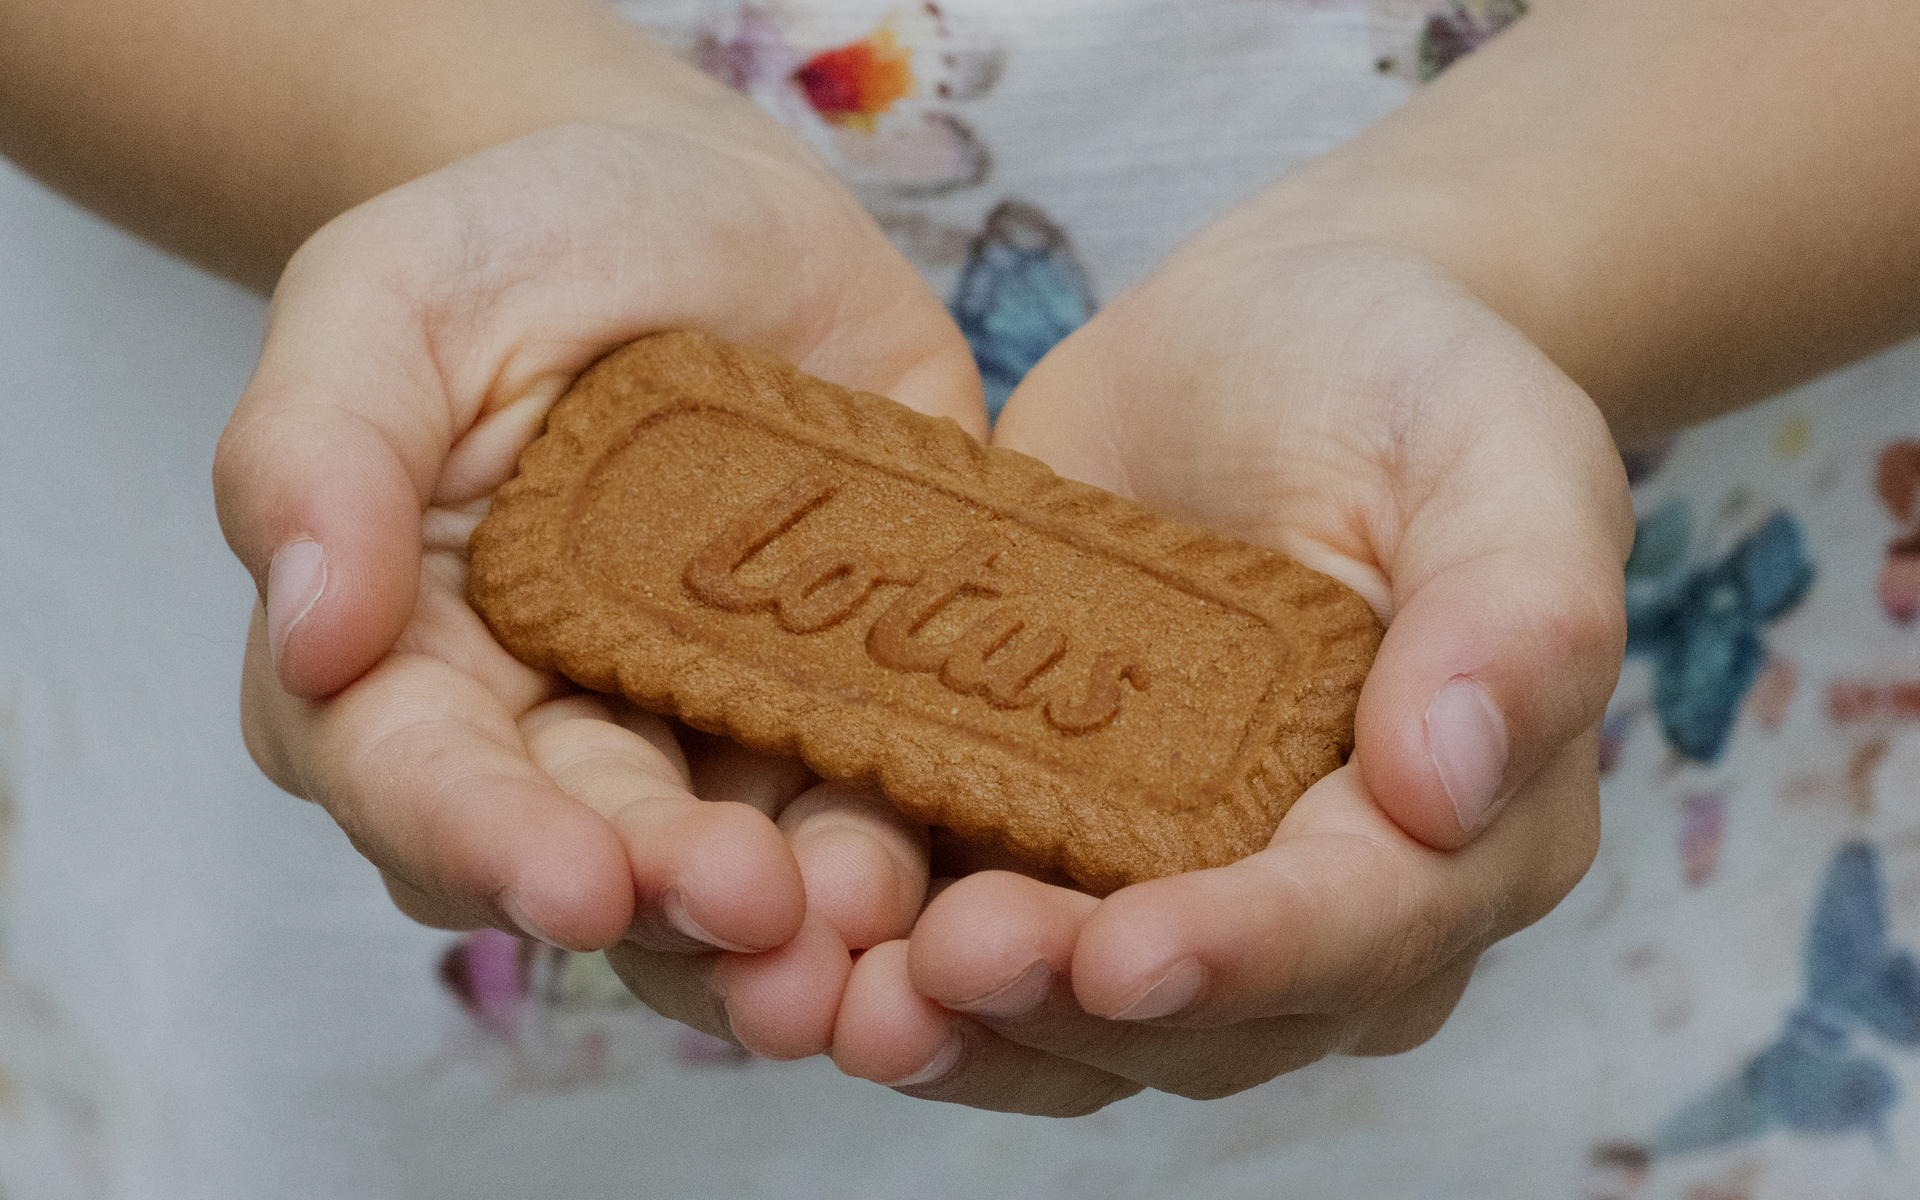 Picture of a pack of biscuits with the logo of Lotus Speculoos for